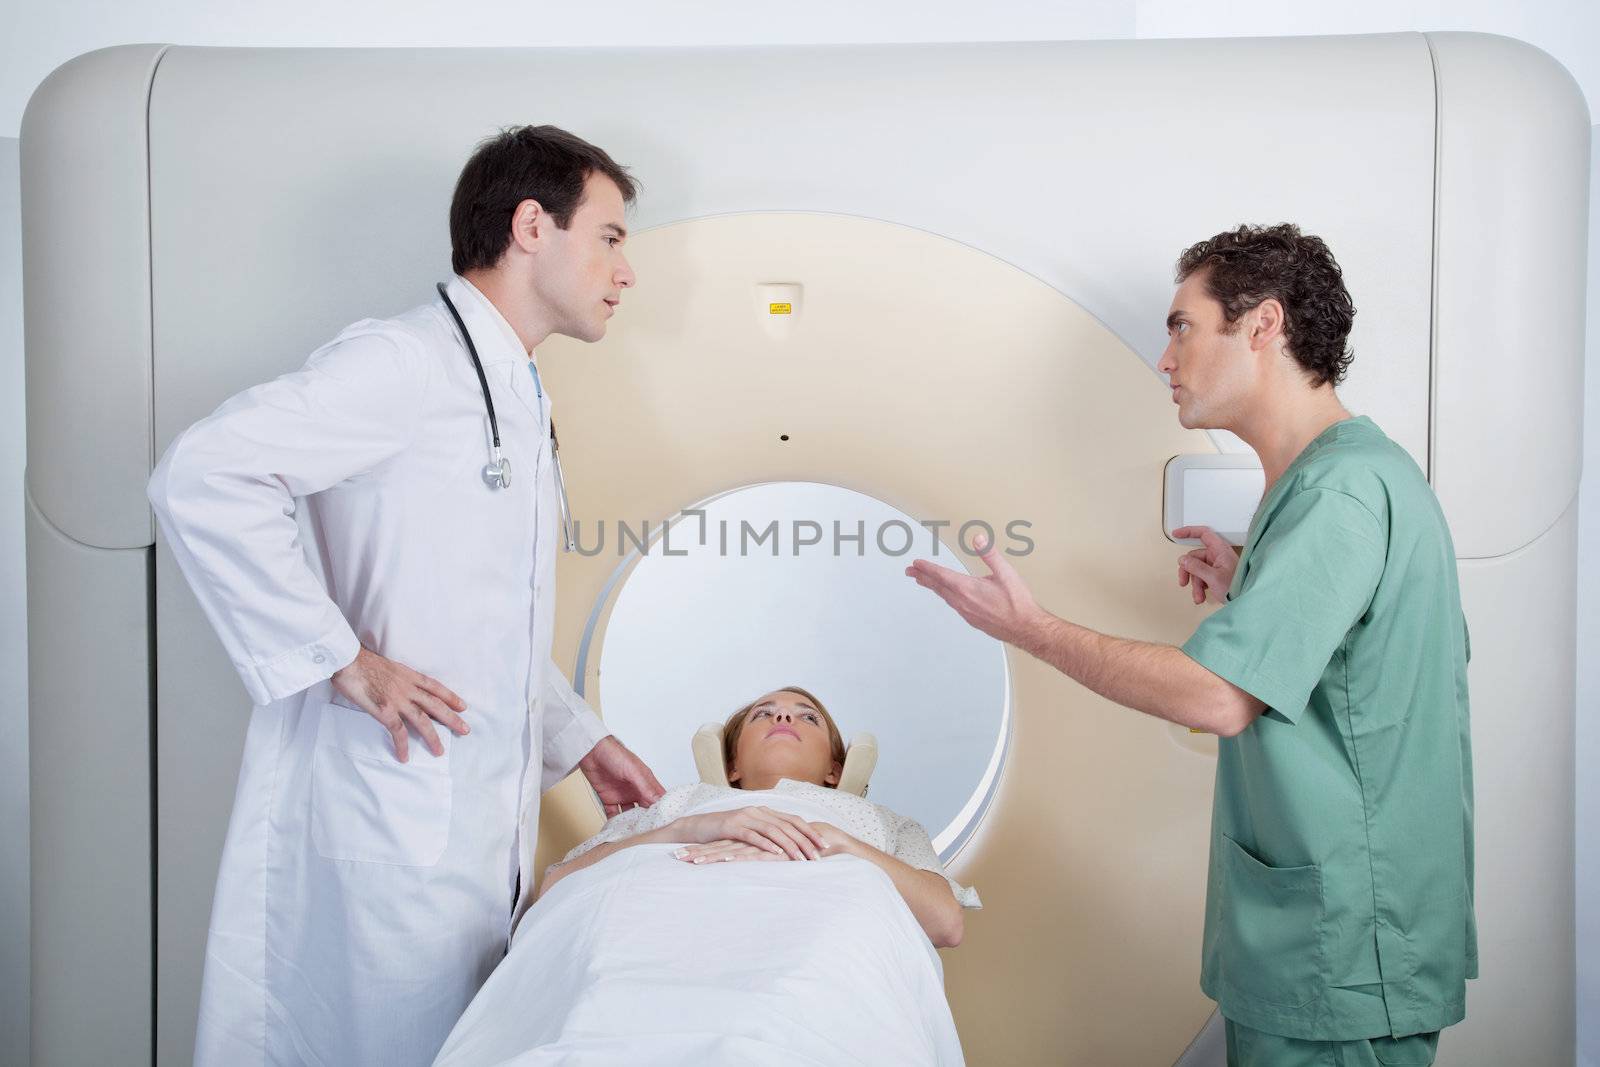 A doctor and technician discussing a CT scan